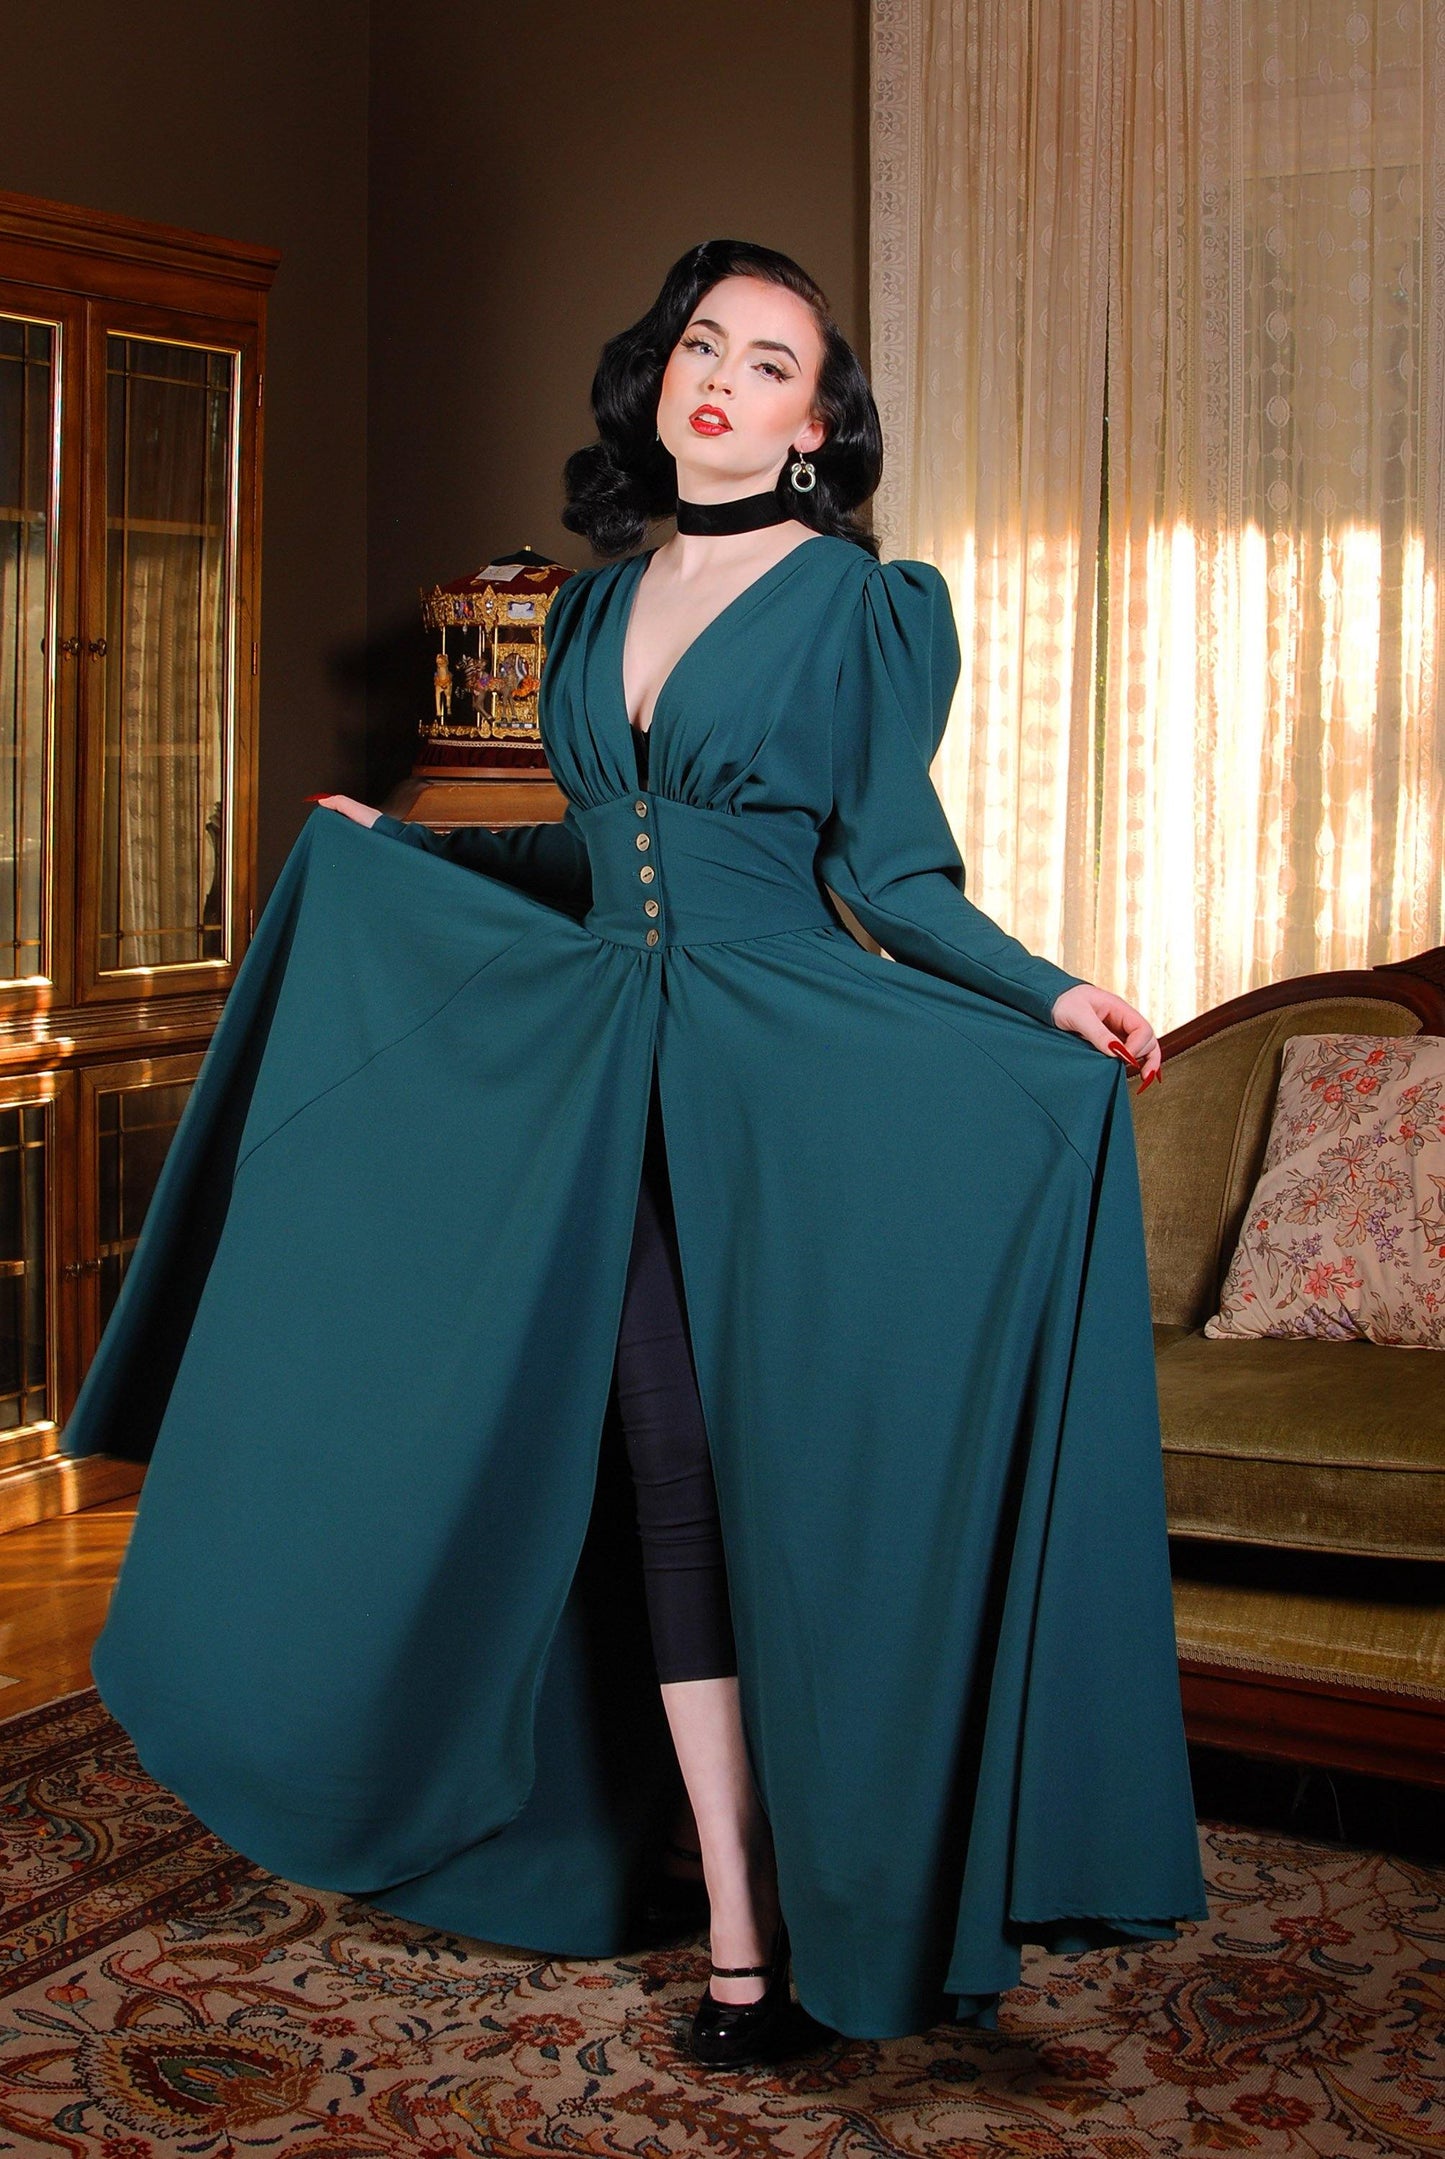 Sold Out - Clarice Coat Dress in Spruce Green Poly Crepe | Laura Byrnes Design - pinupgirlclothing.com